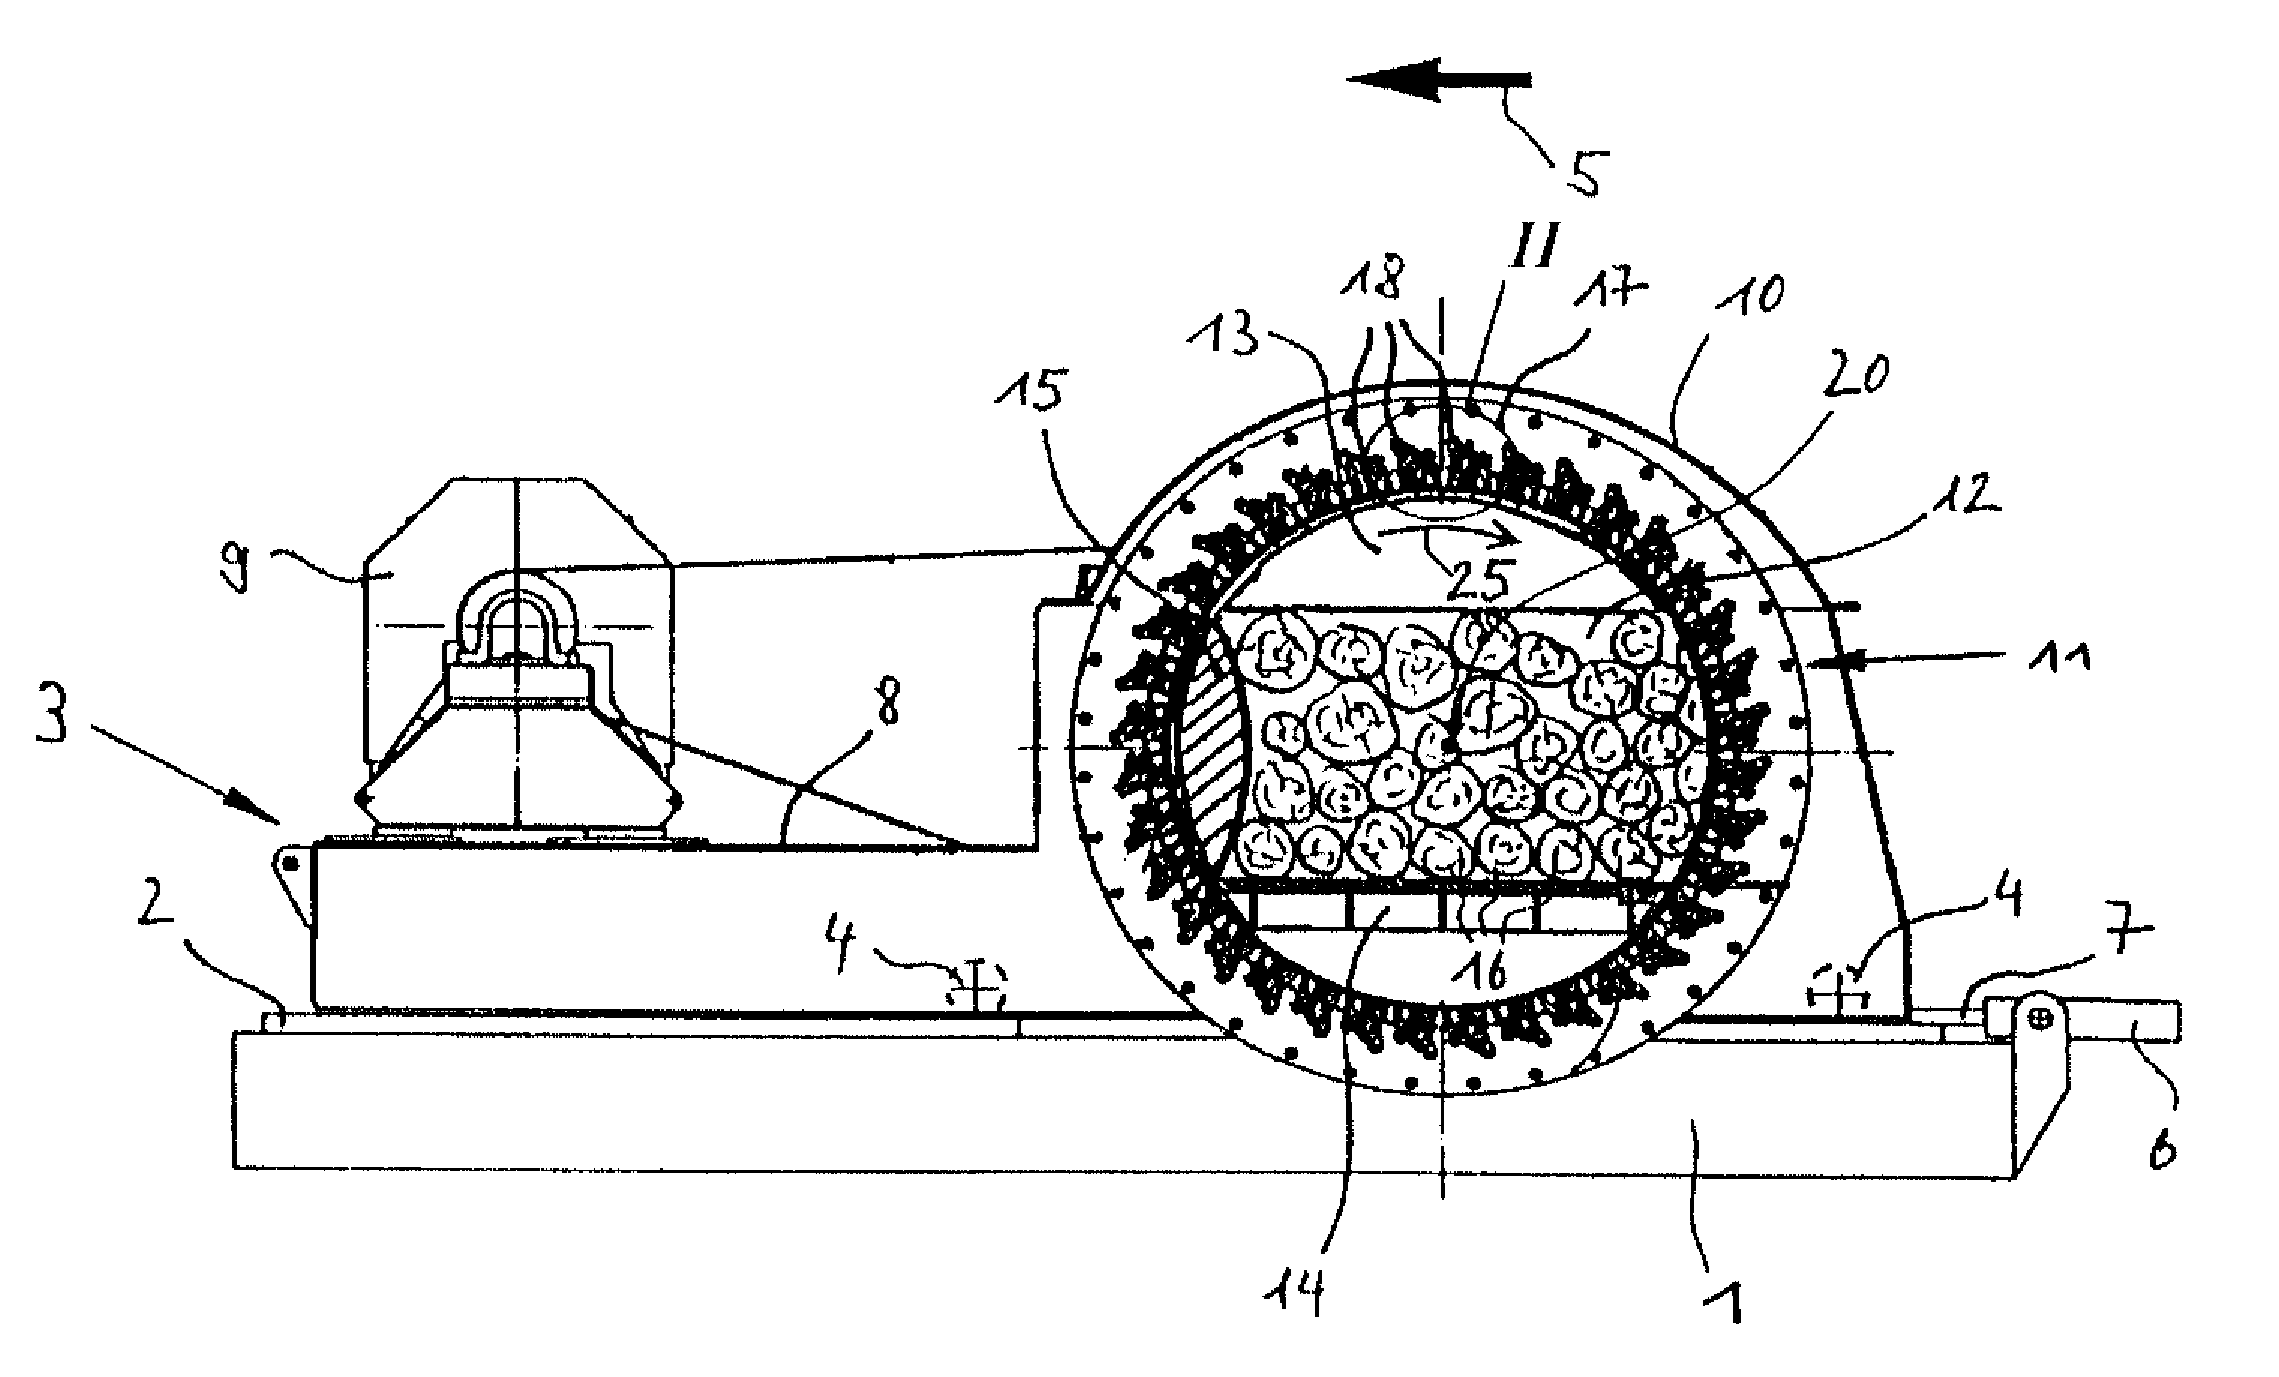 Comminuting unit for a comminuting device for comminuting feed material, in particular knife basket